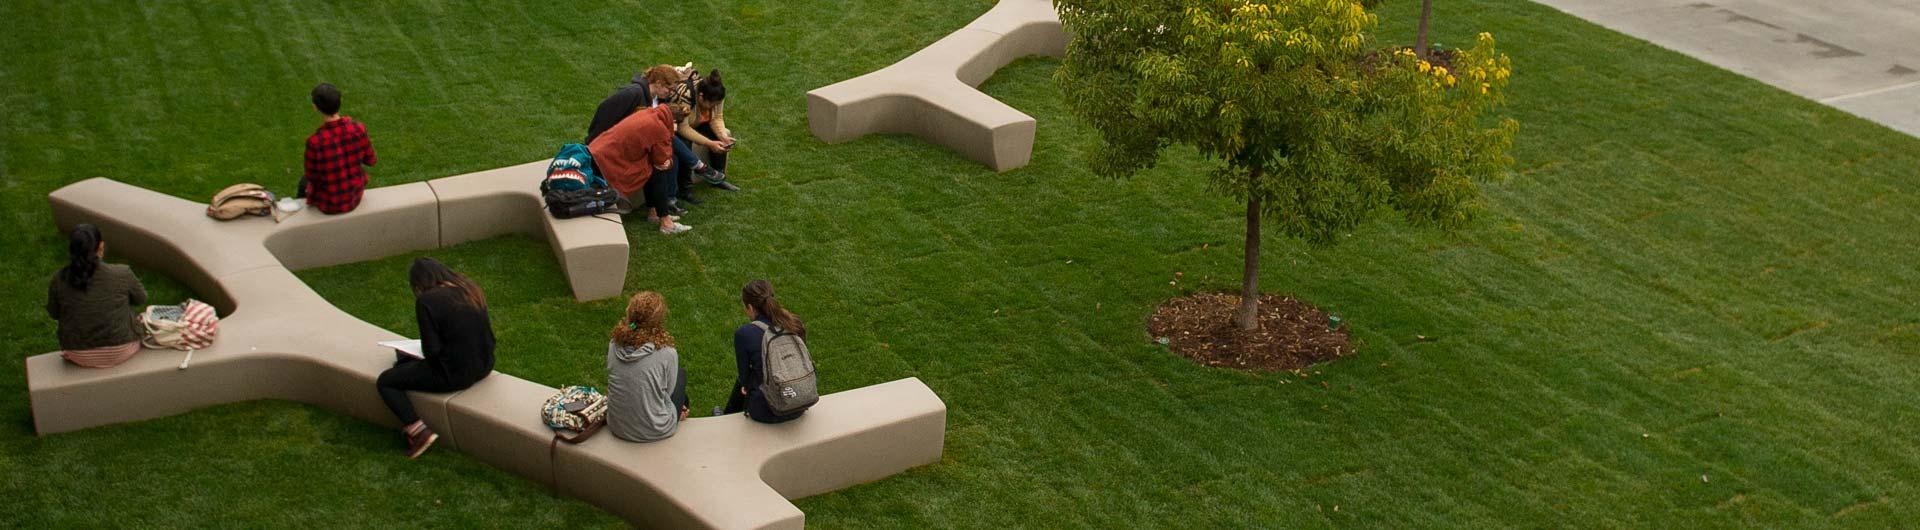 Students on campus benches